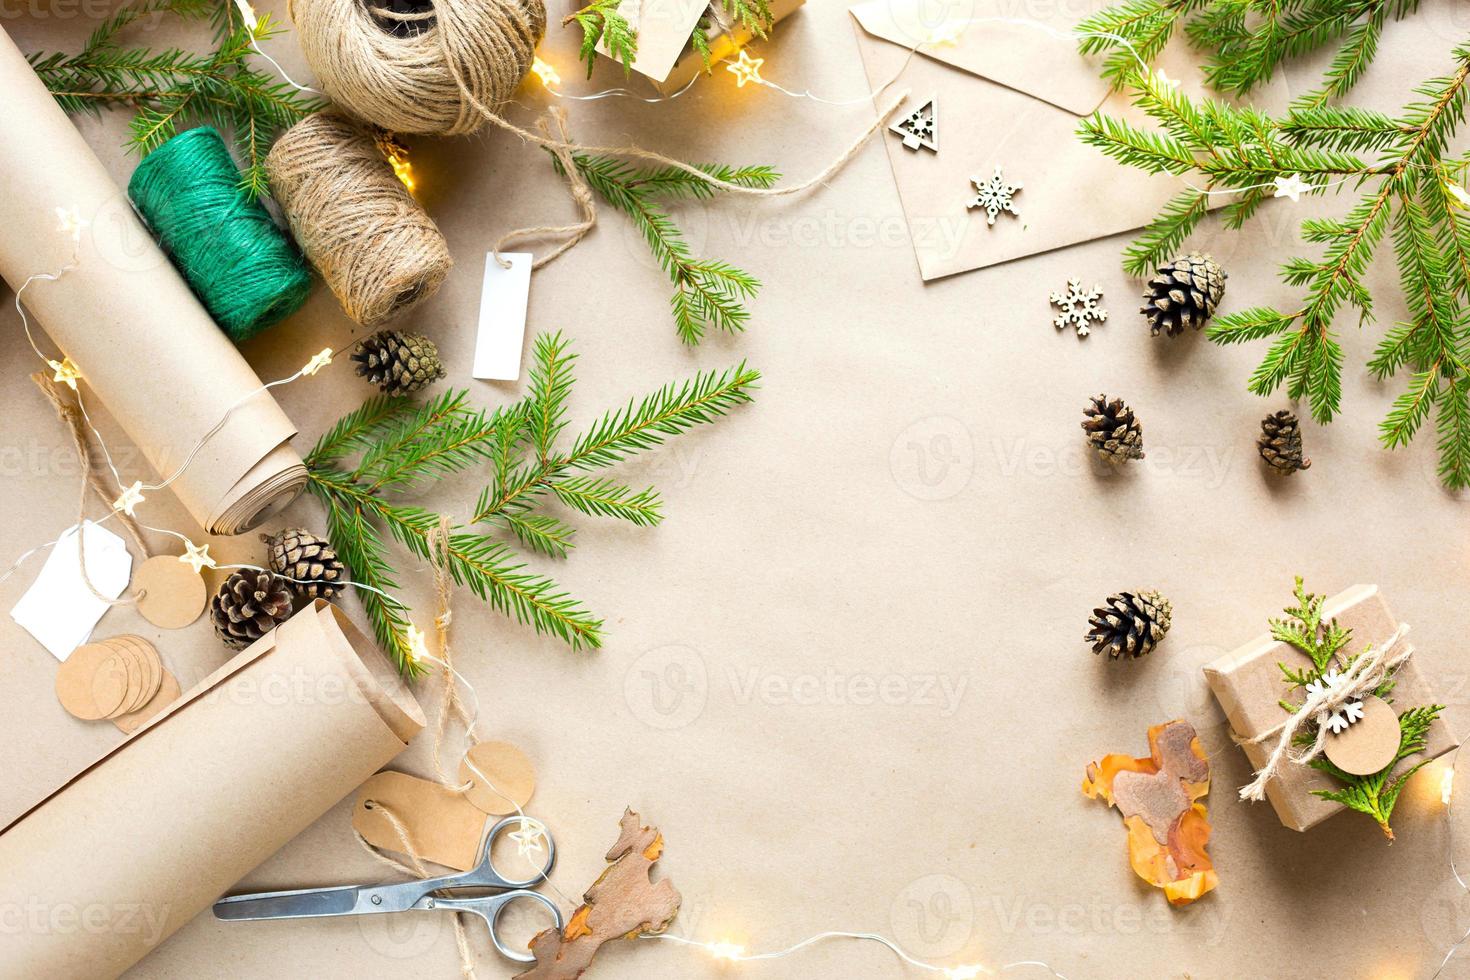 Background with copyspace for Christmas and new year in eco-friendly materials kraft paper, gift box, live fir branches, cones, twine. Tags with mock up, natural decor, hand made, DIY. Flatly photo